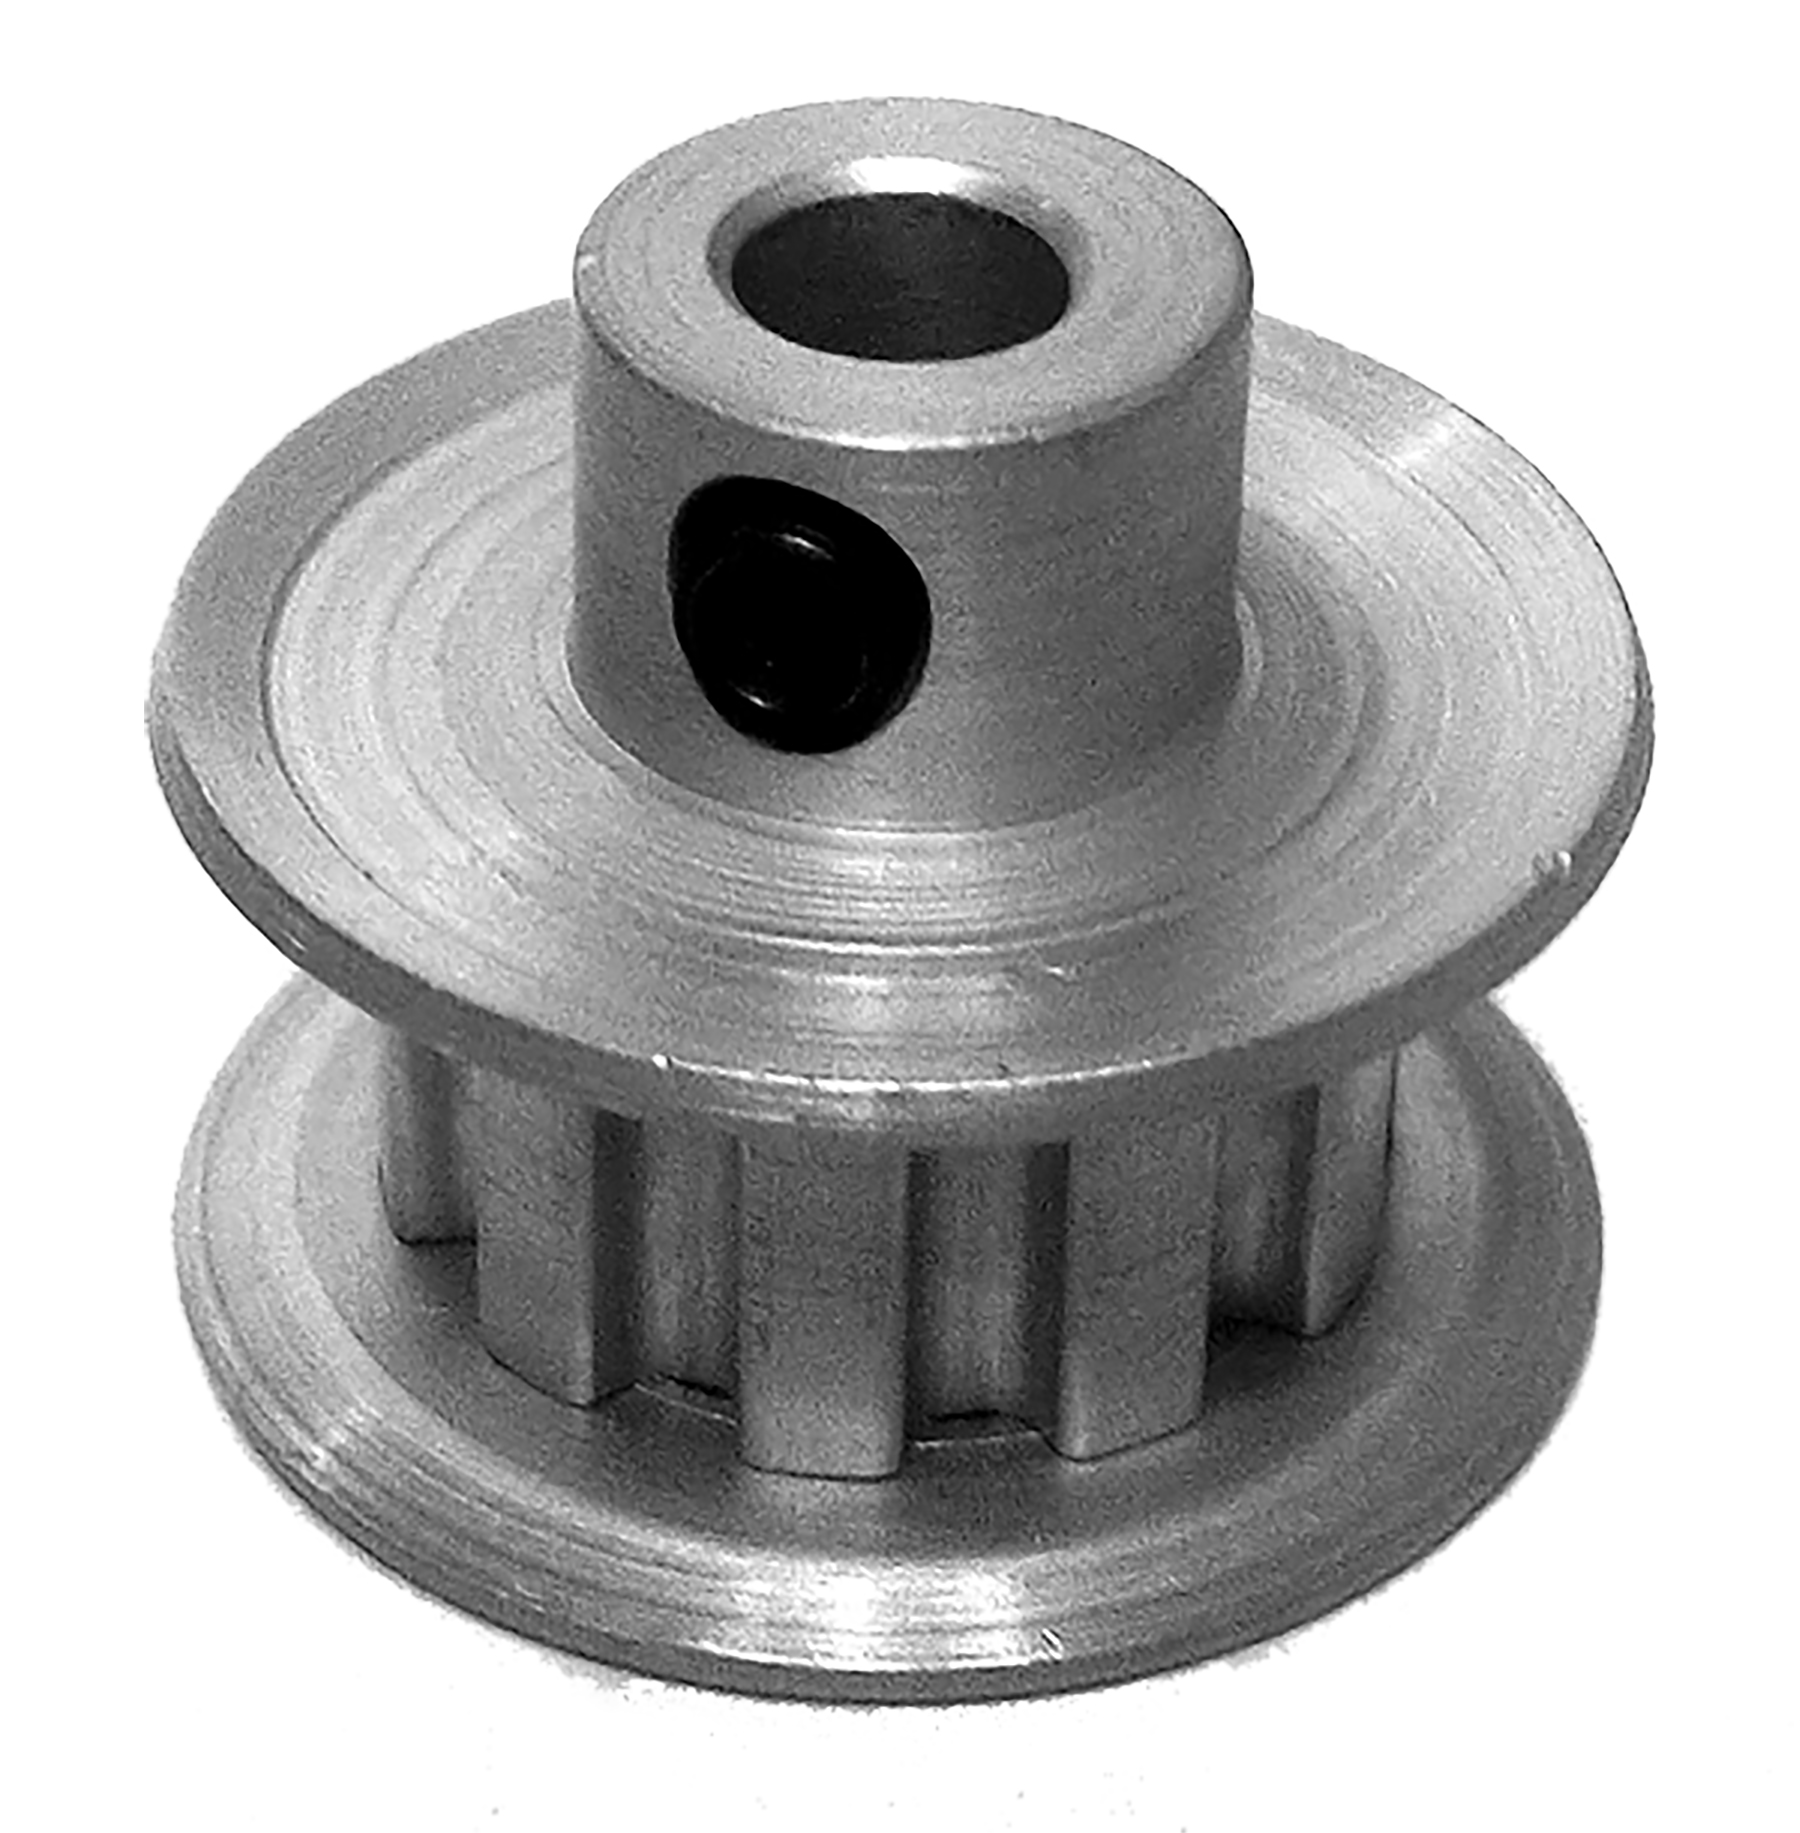 10XL025-6FA2 - Aluminum Imperial Pitch Pulleys